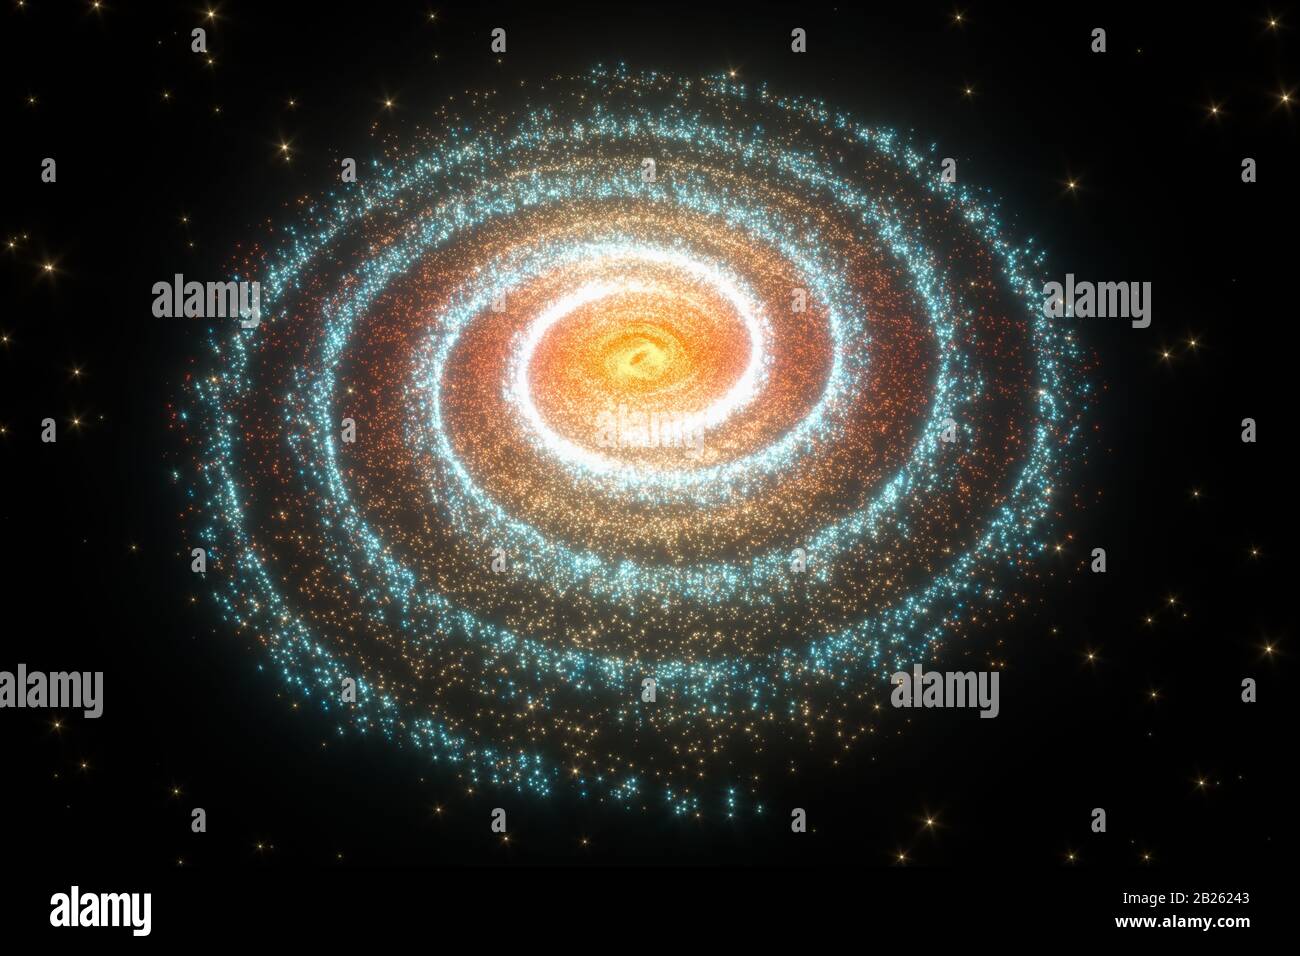 32 Faceon and side views of a typical spiral galaxy like the Milky Way